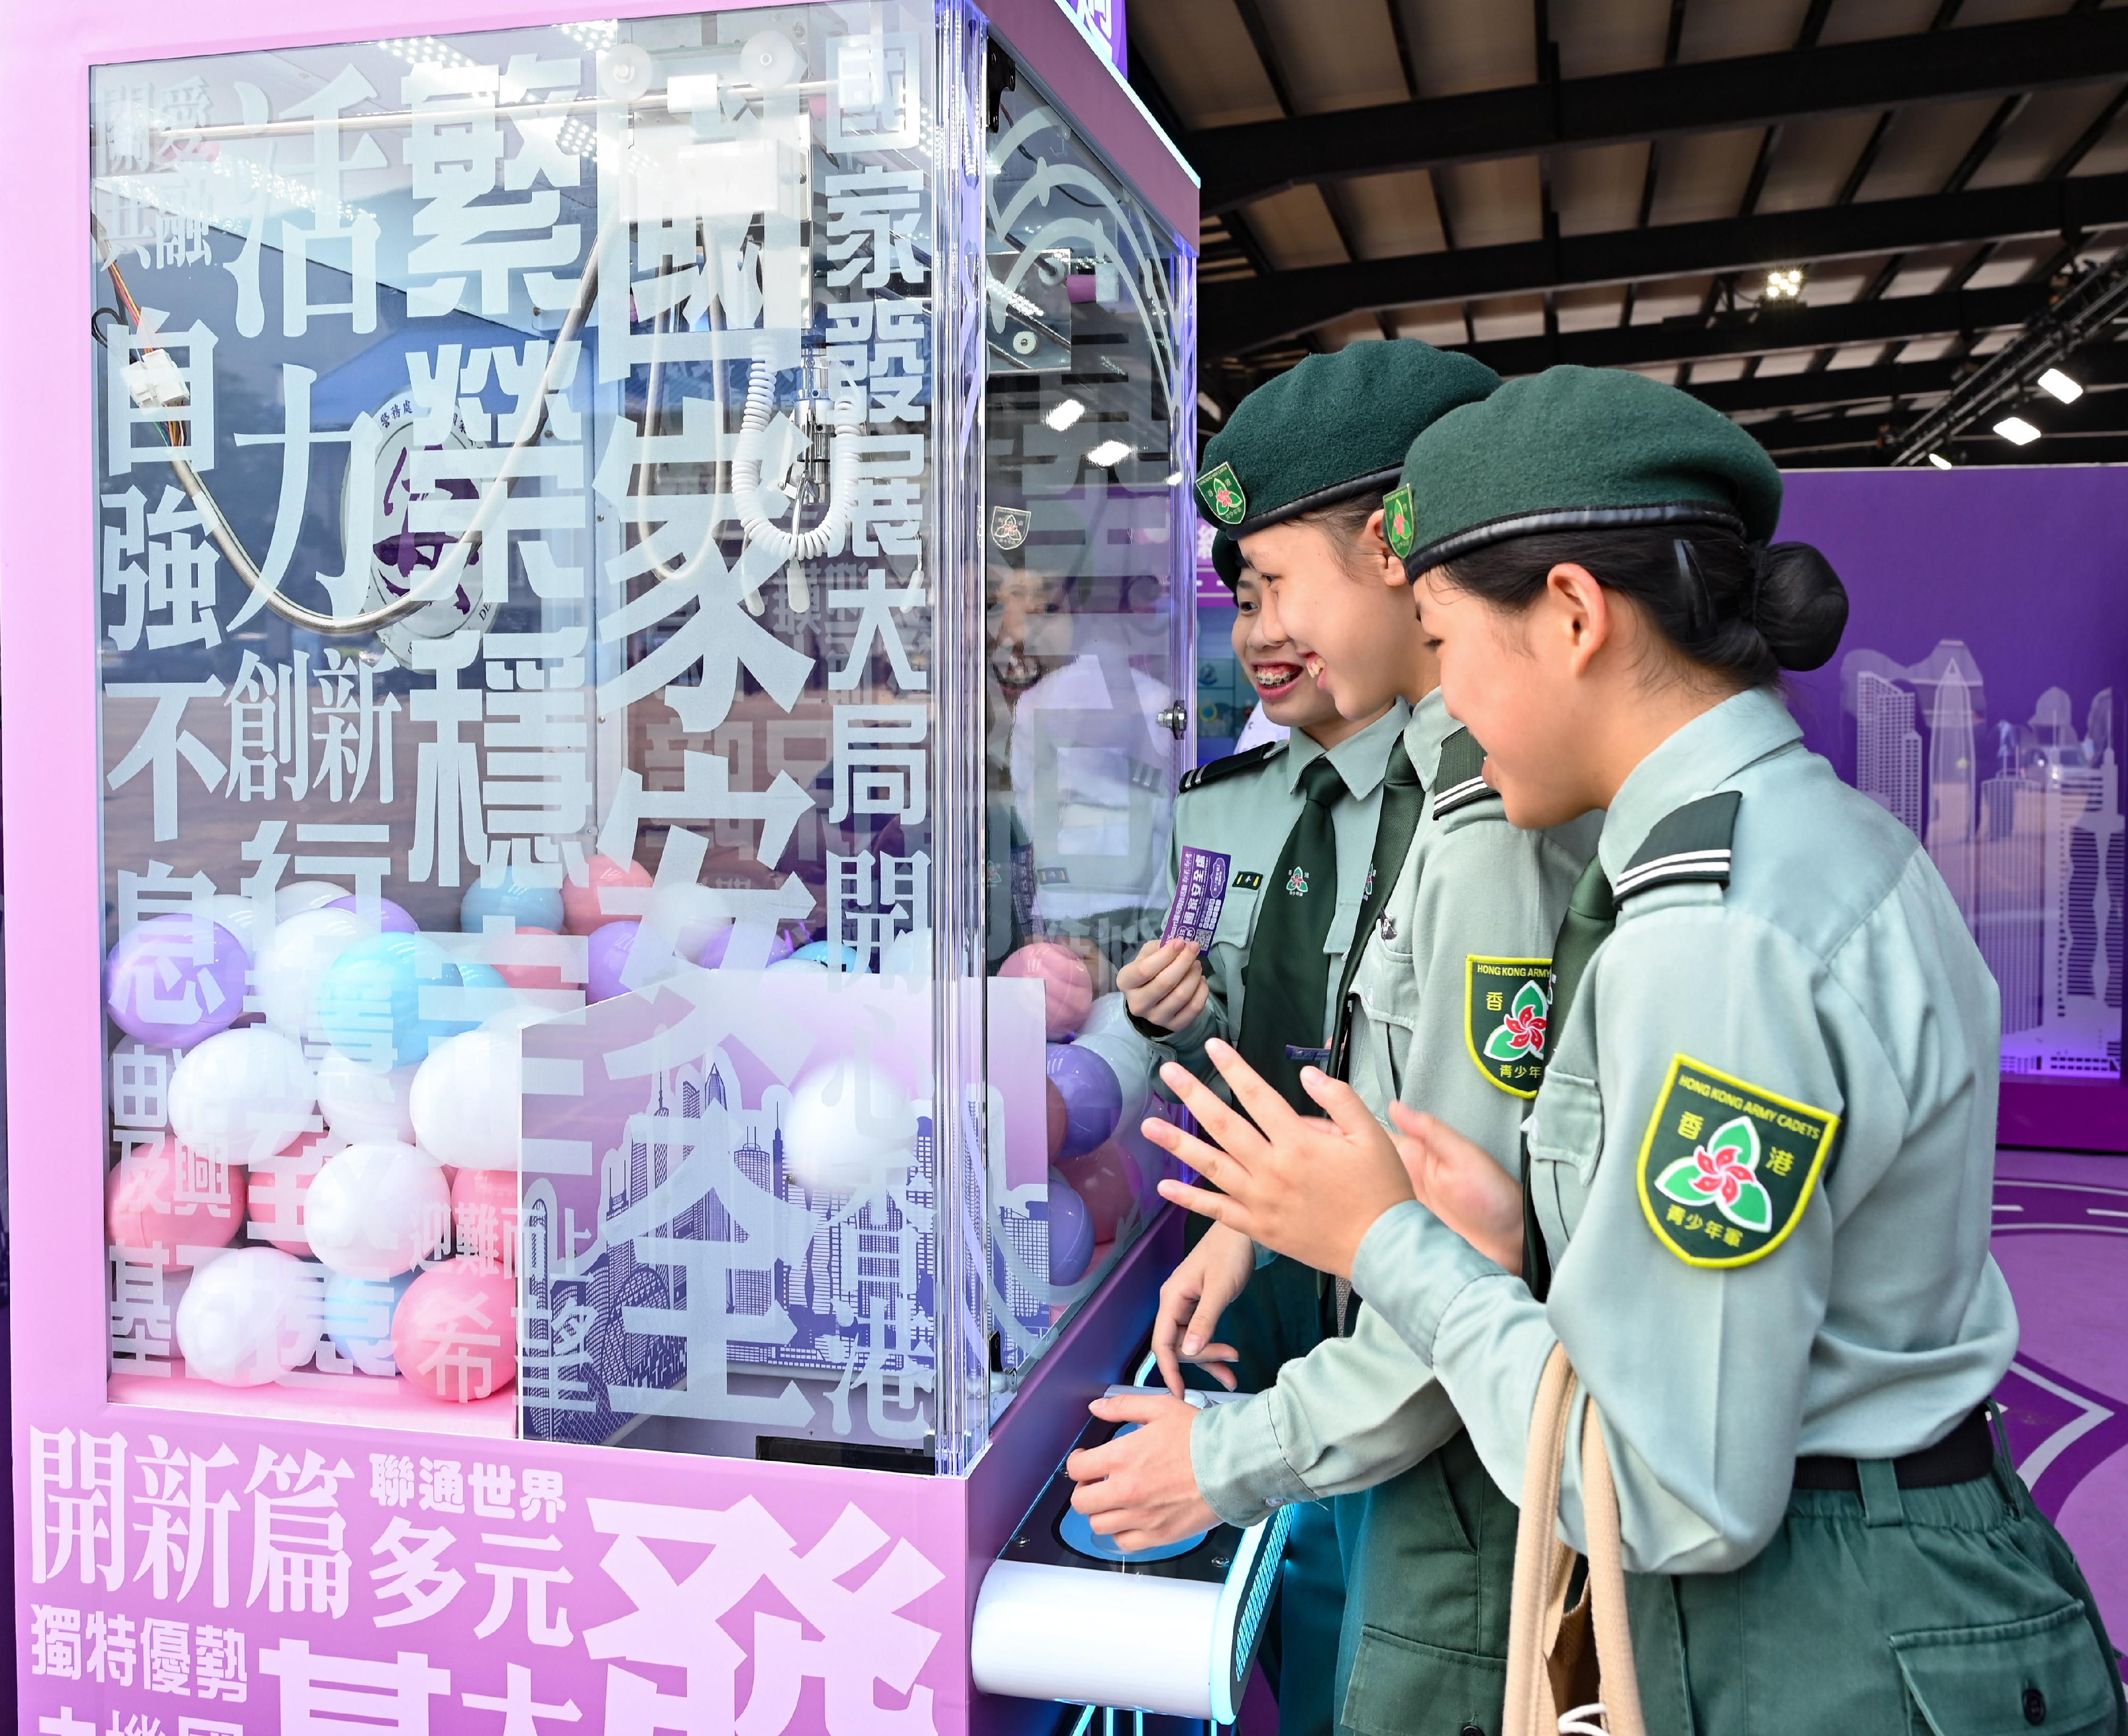 The Police Force held an open day in support of the National Security Education Day at Hong Kong Police College today (April 15). Photos shows participants taking part in a game hosted by the Force to learn more about national security.

